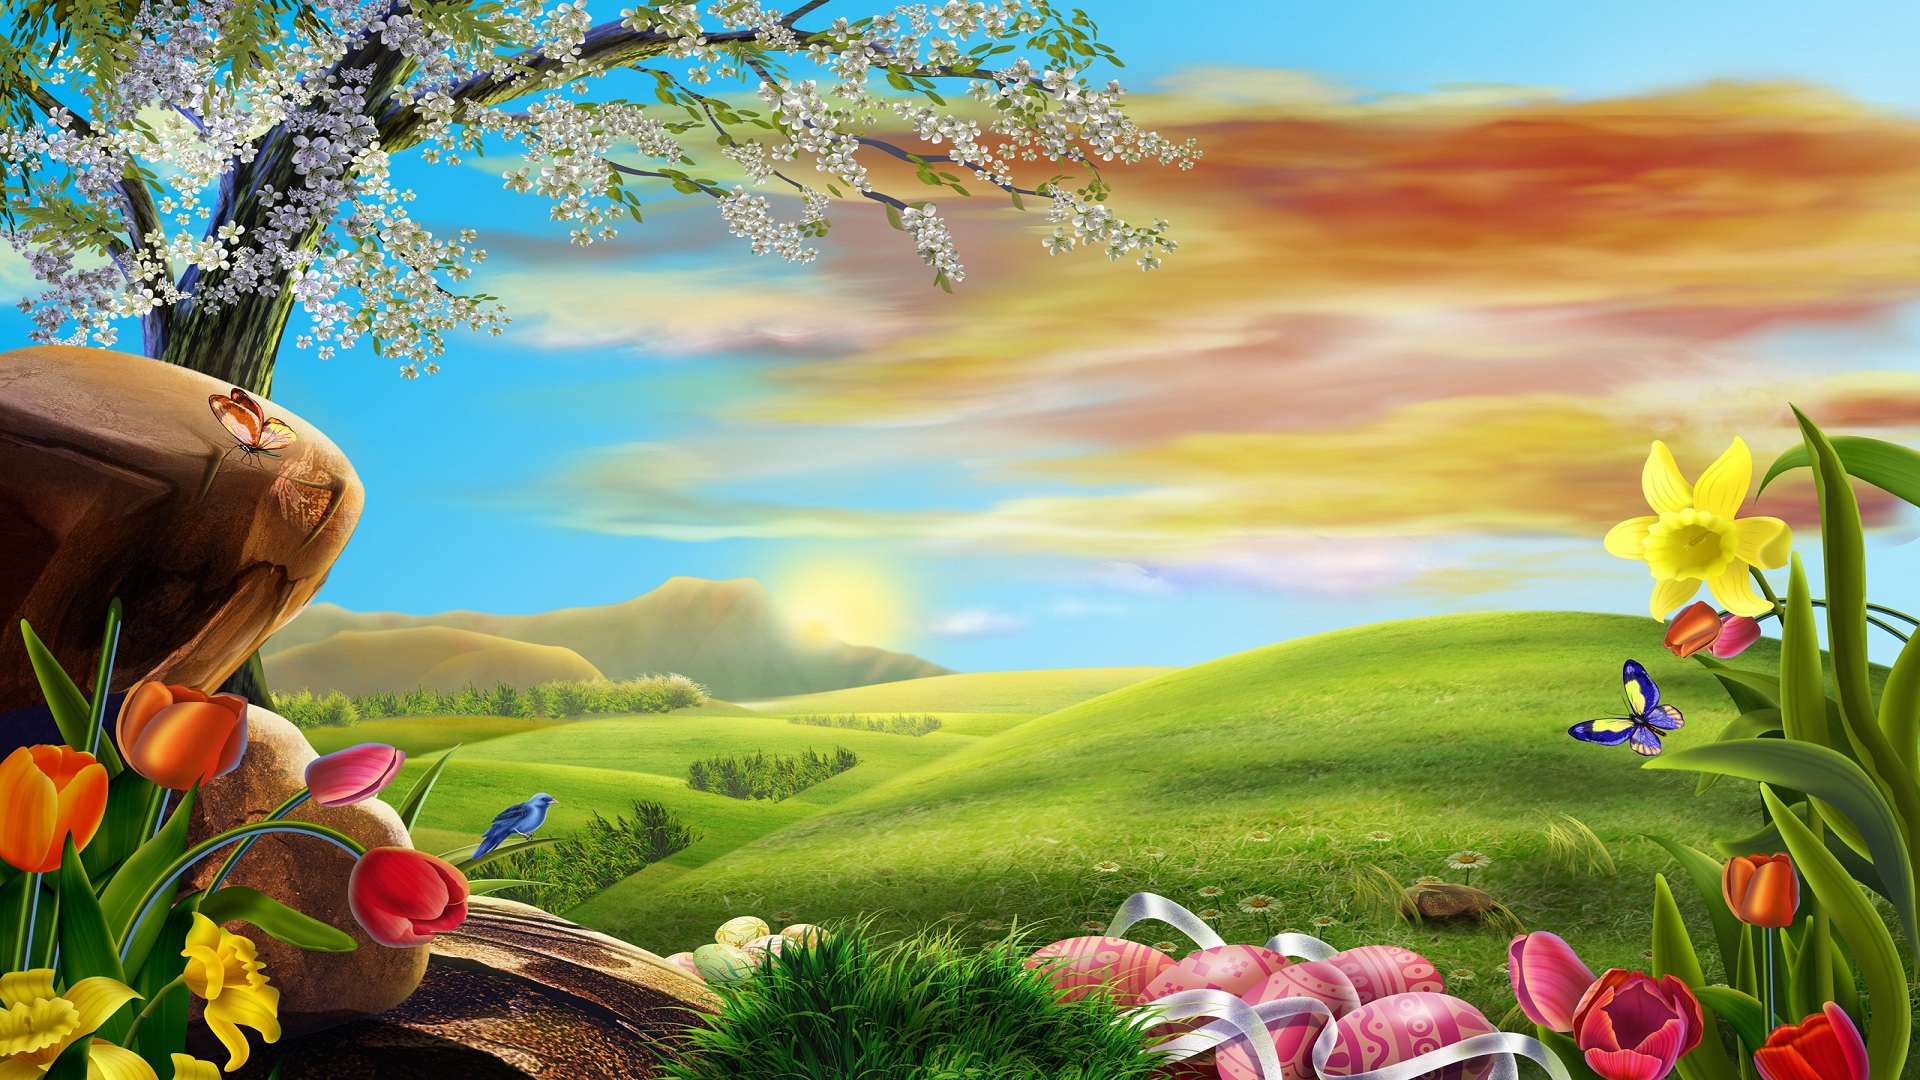 nature 3d wallpaper windows 7,natural landscape,people in nature,nature,meadow,natural environment